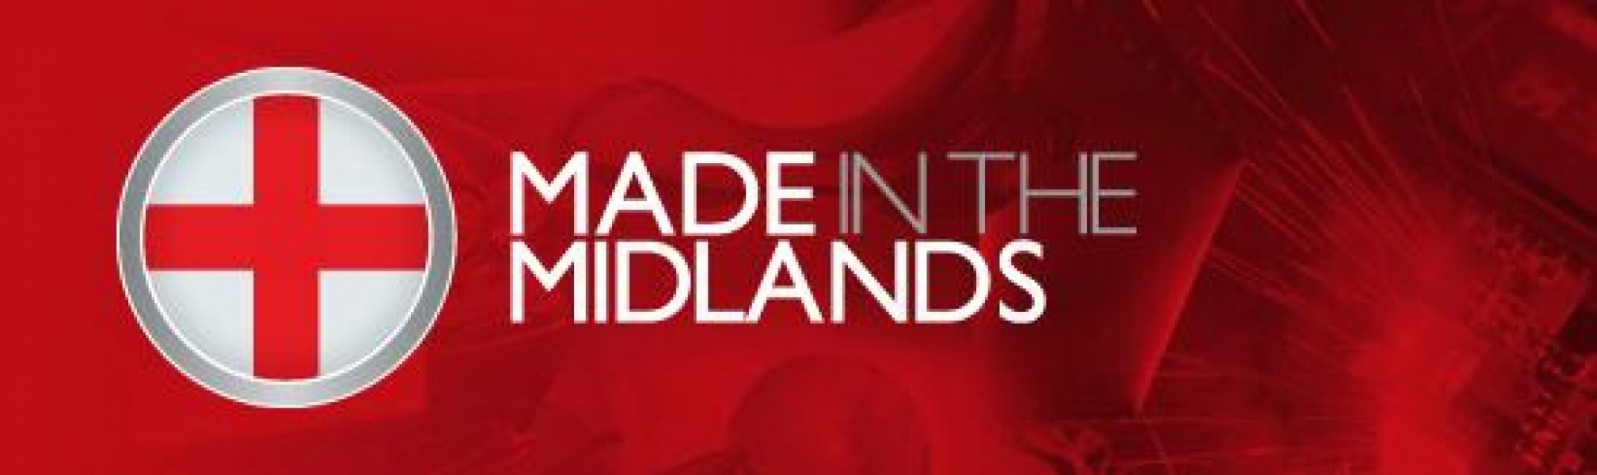 Register now for the Made in the Midlands Expo 2014